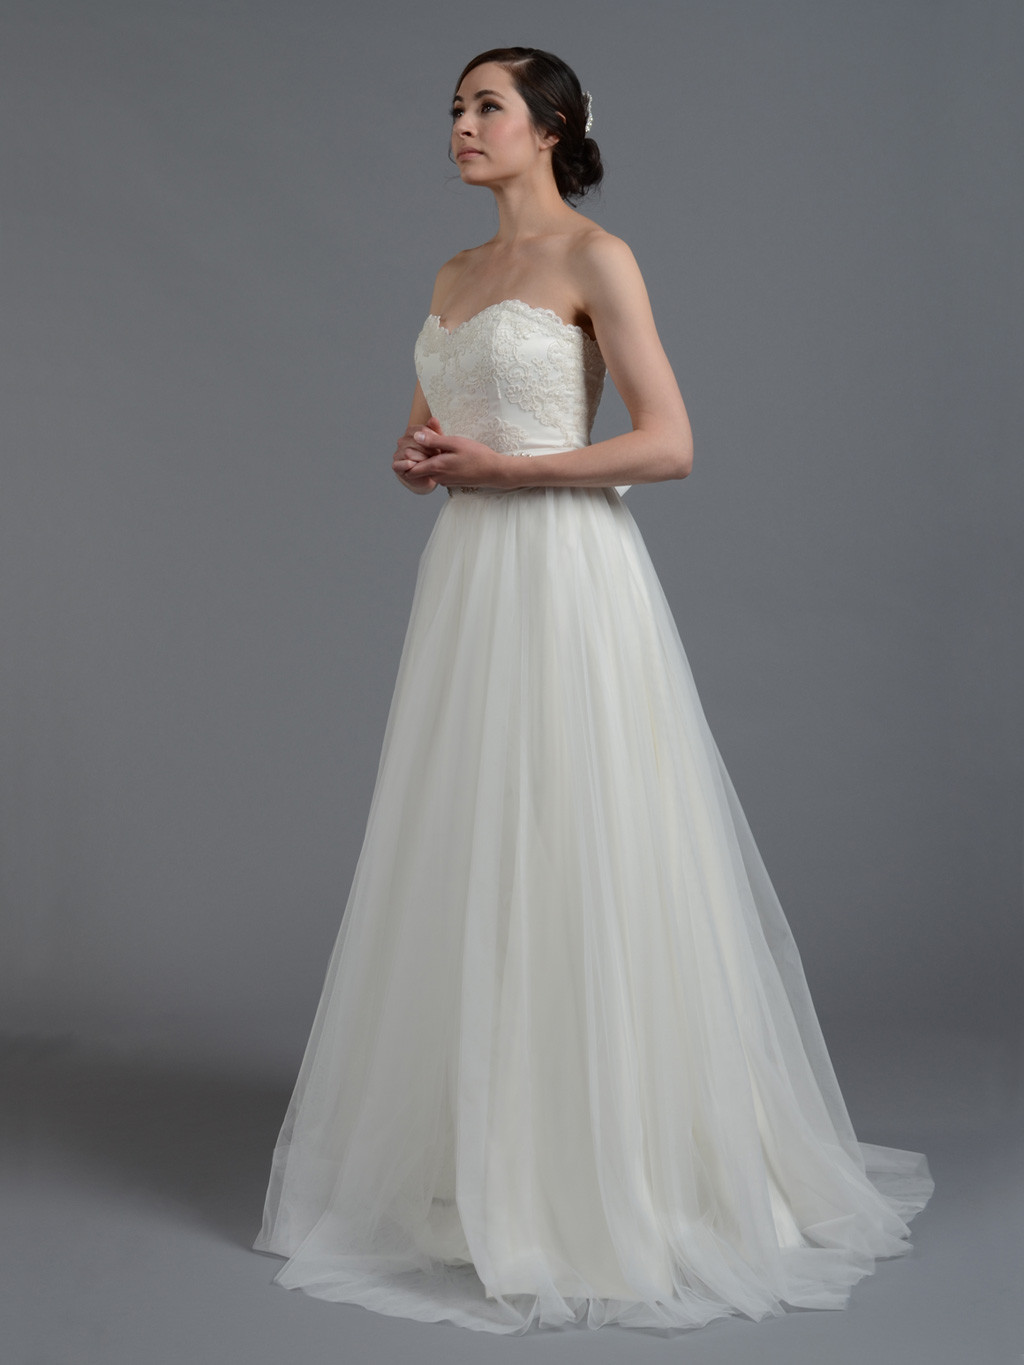 Lace And Tulle Wedding Dress
 Ivory strapless lace wedding dress with tulle skirt